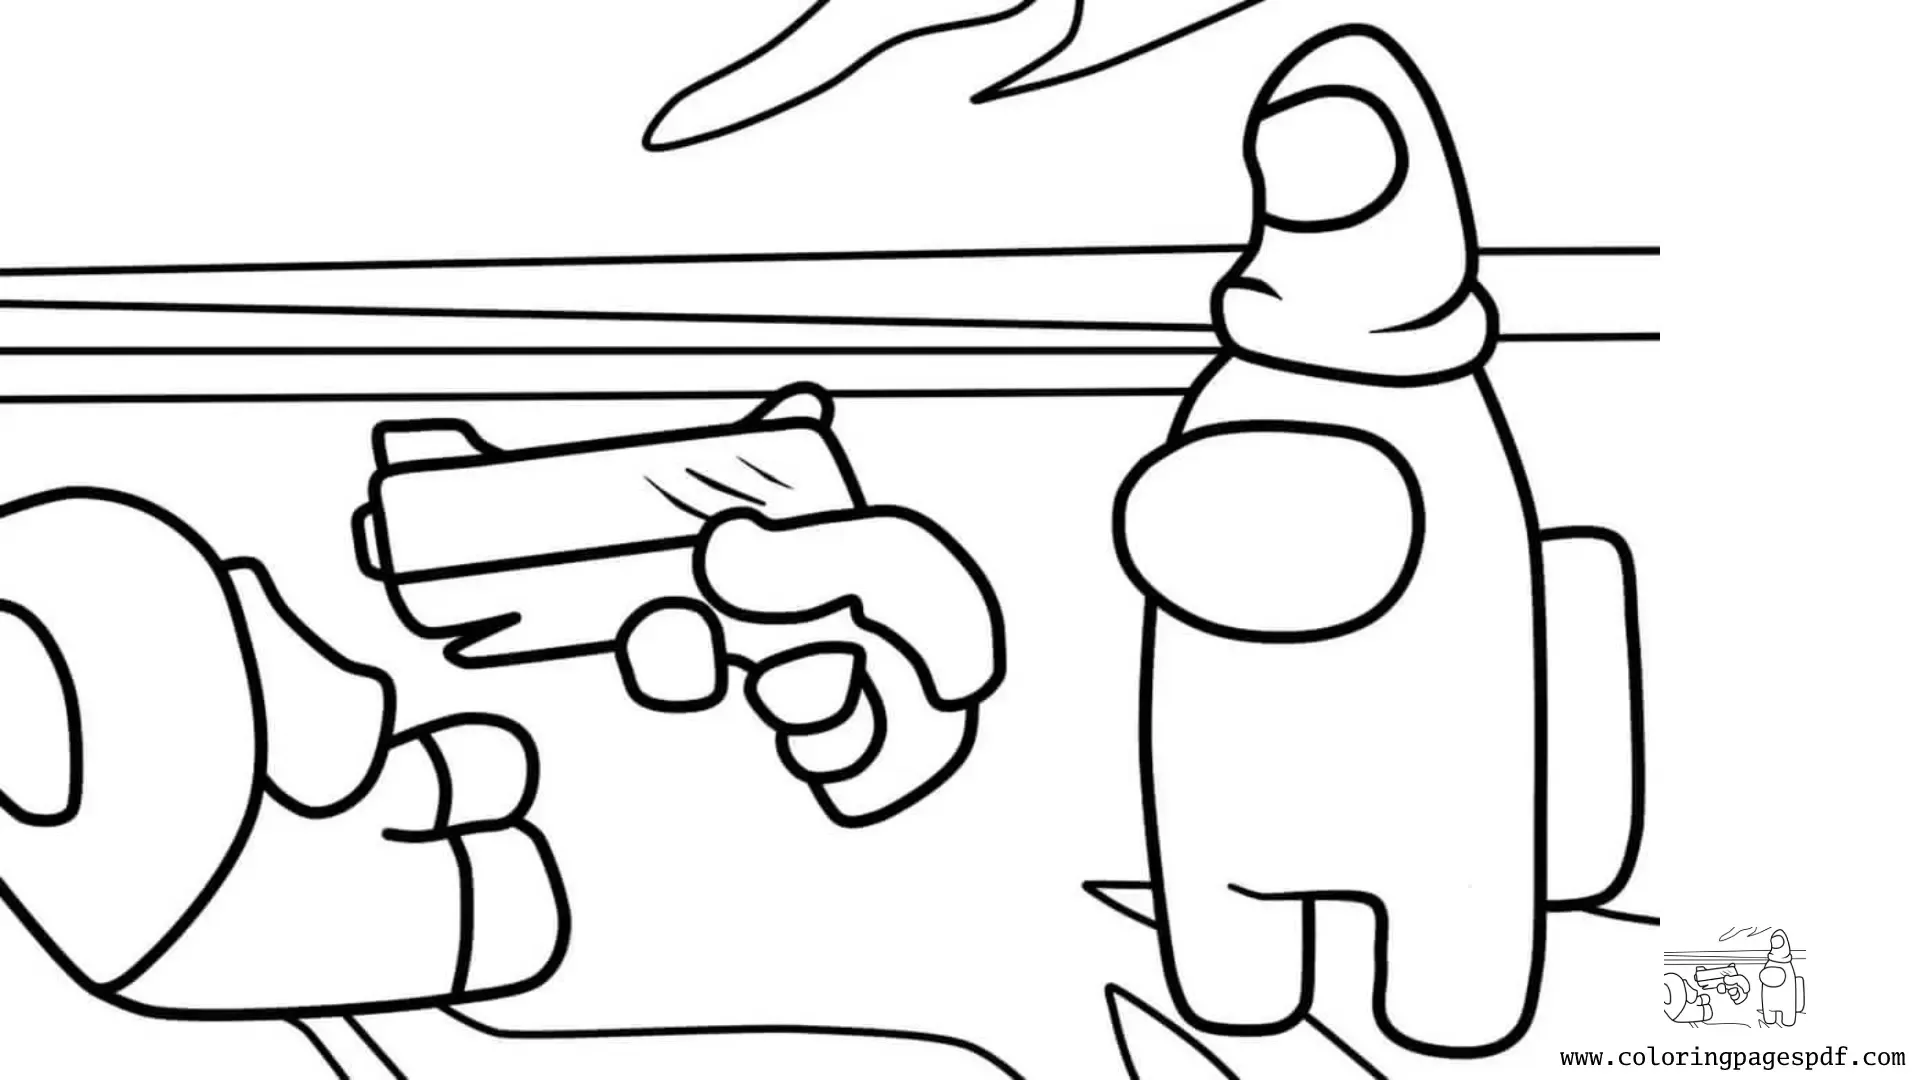 Coloring Page Of Pistol Kill Animation